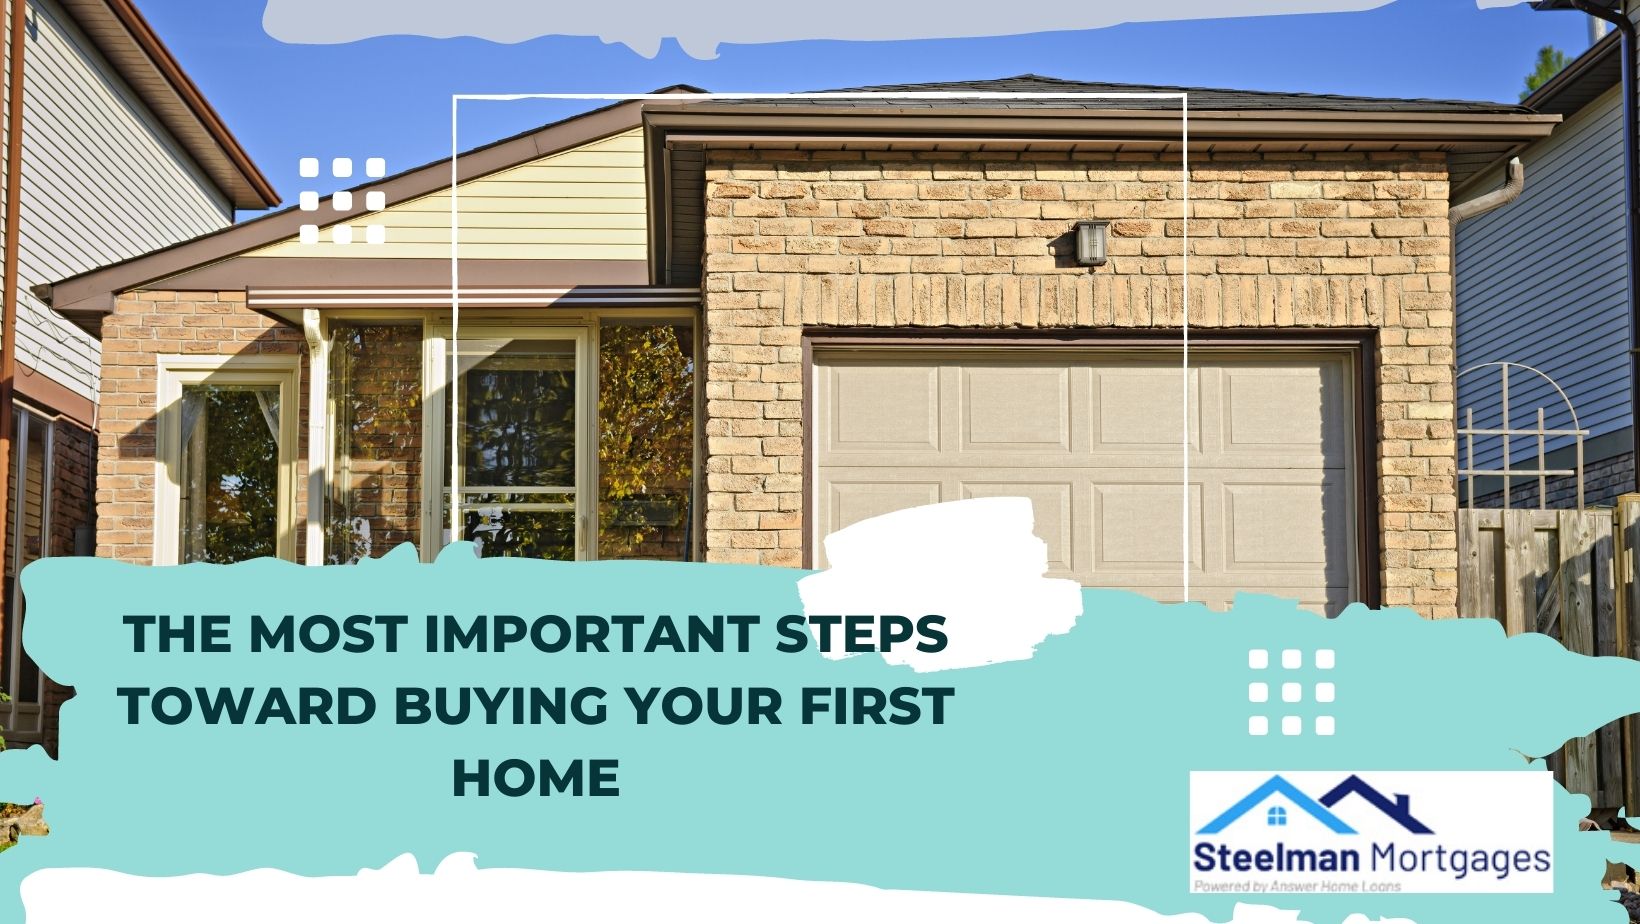 The Most Important Steps Toward Buying Your First Home